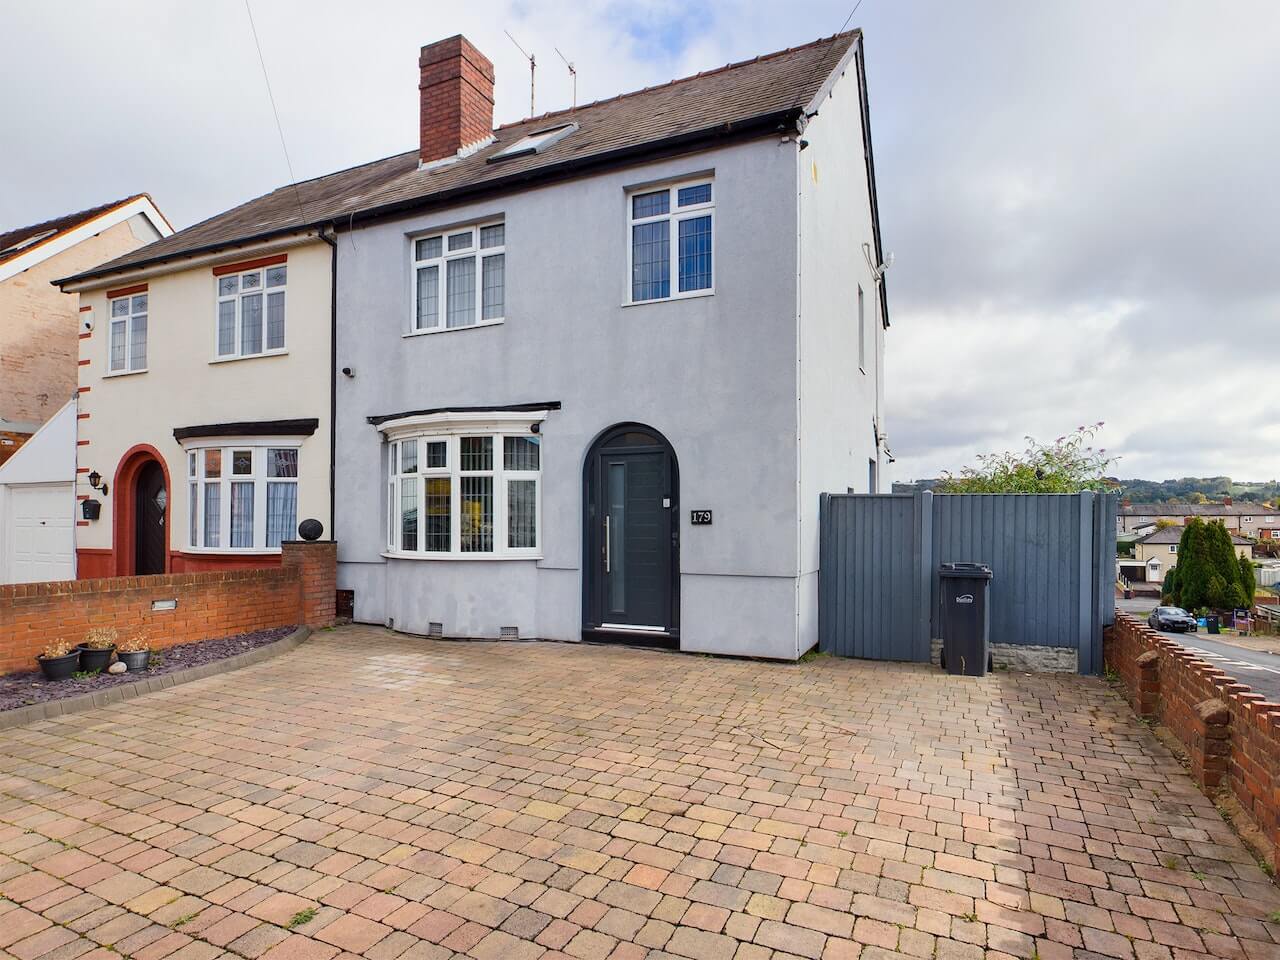 3 Bedroom House for Sale in Cradely Road, Sedgley